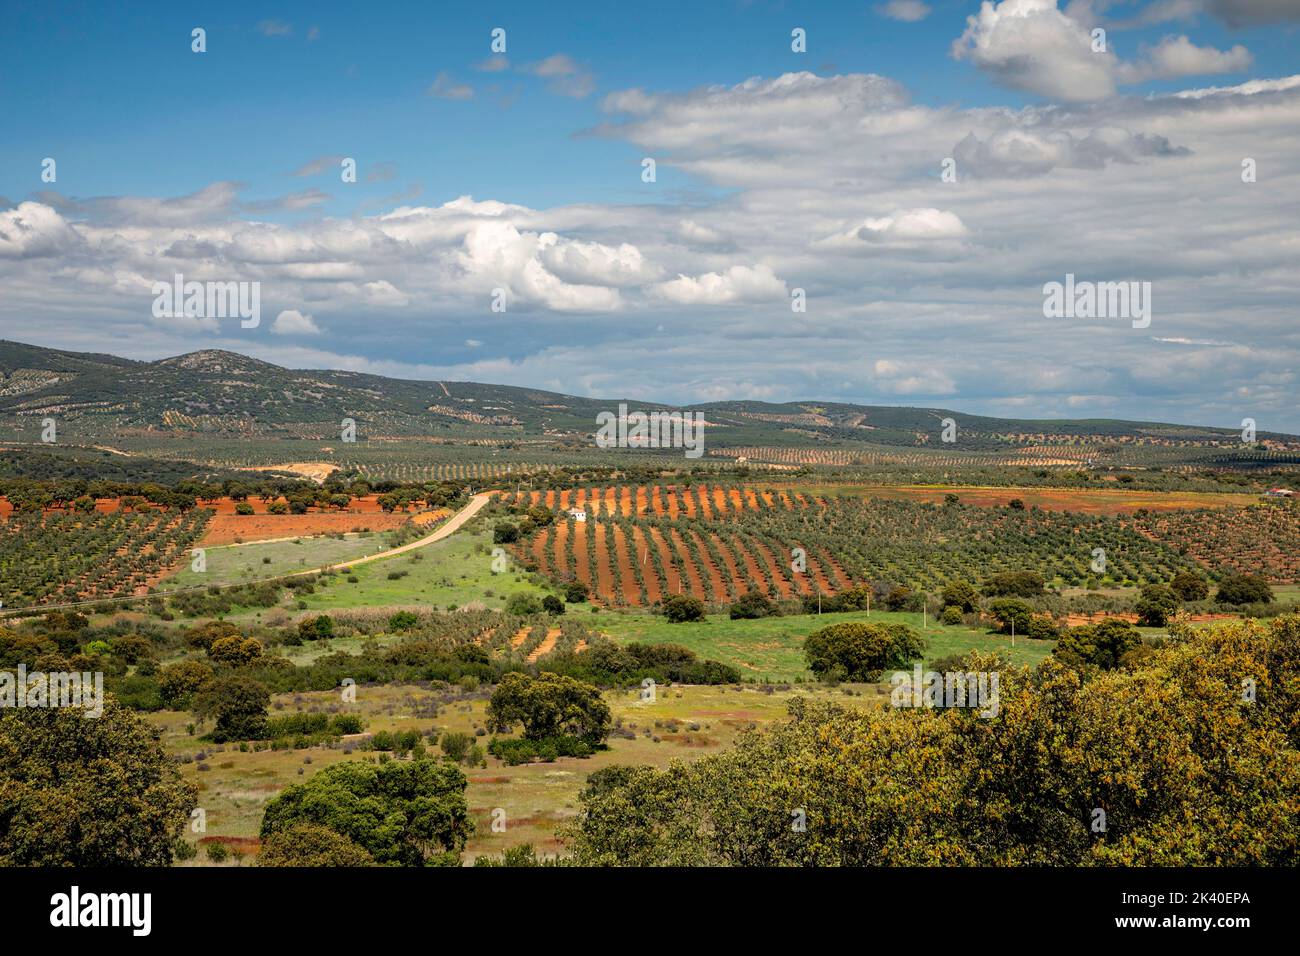 Mediterranean cultural landscape, olive groves and evergreen oaks, Spain, Extremadura, SW Castuera Stock Photo